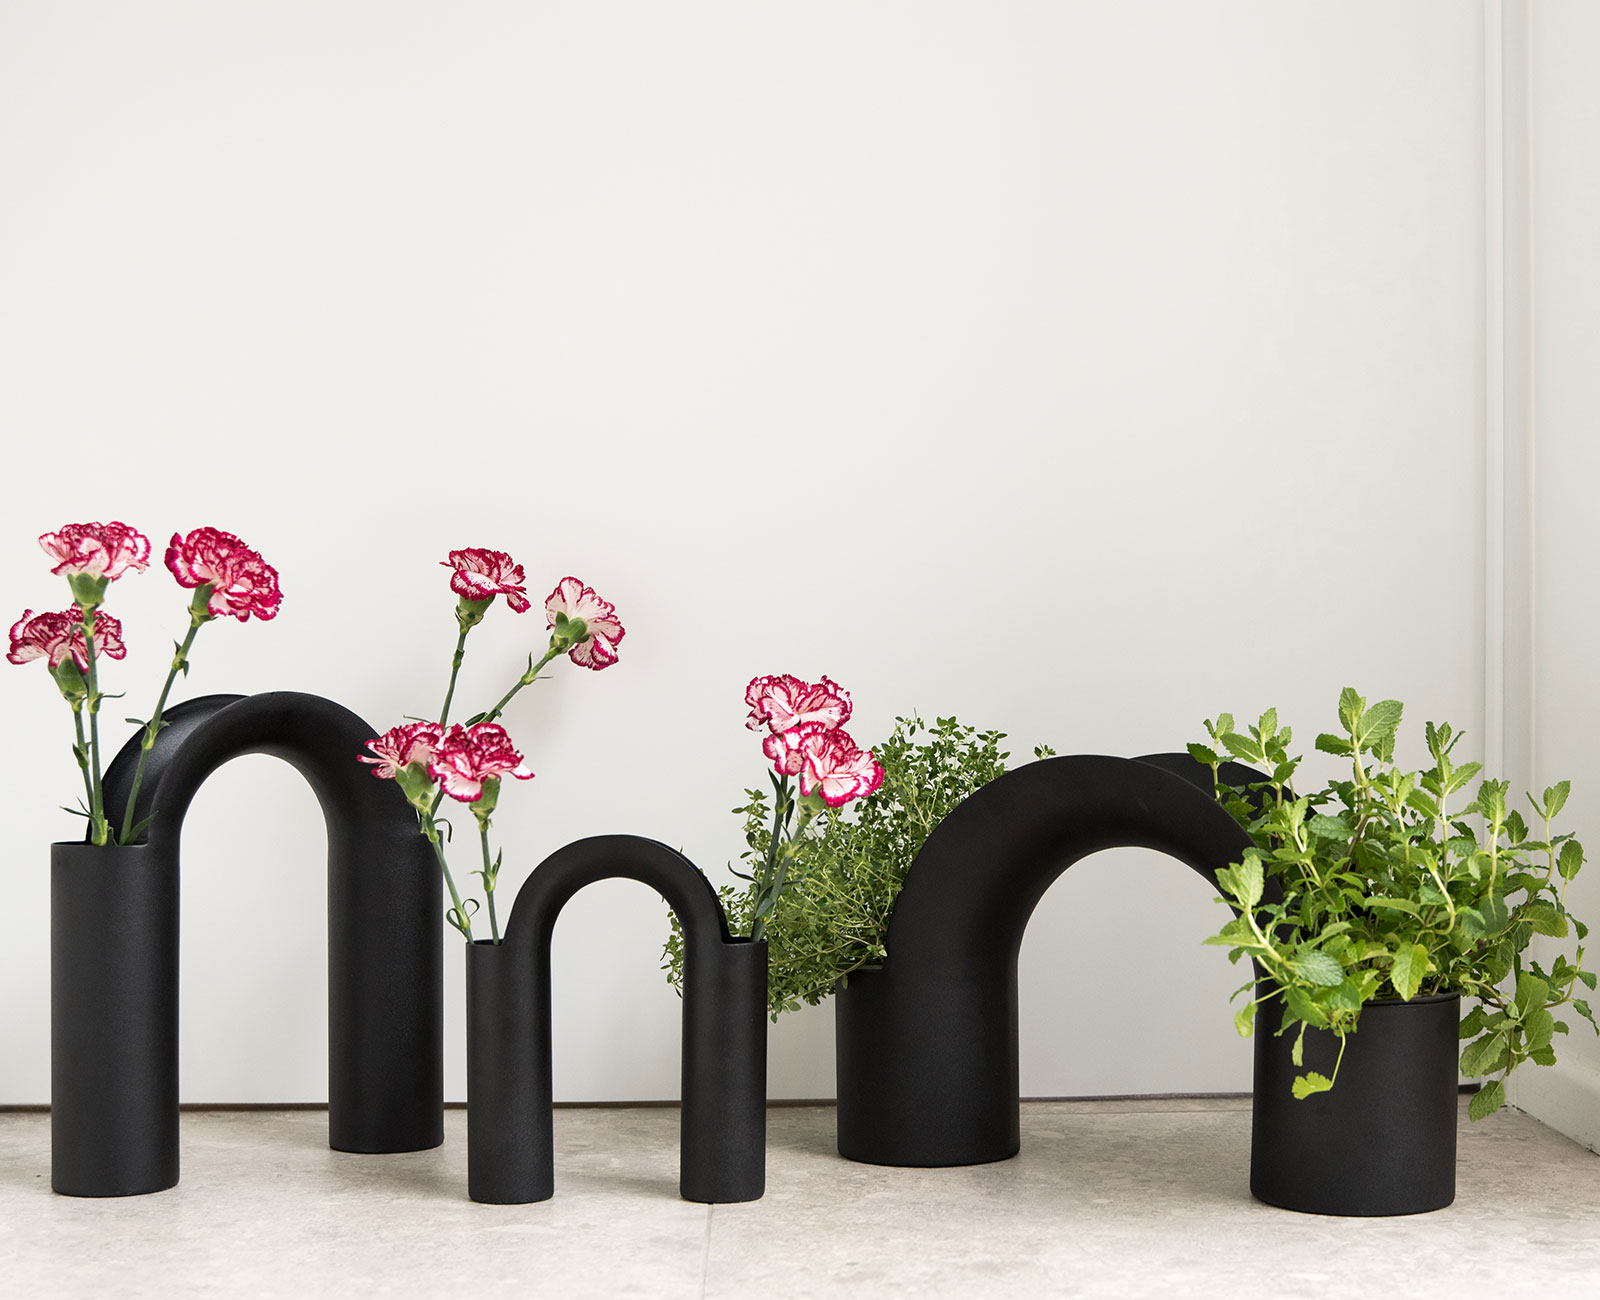 Bridge vase collection with flowers and grass